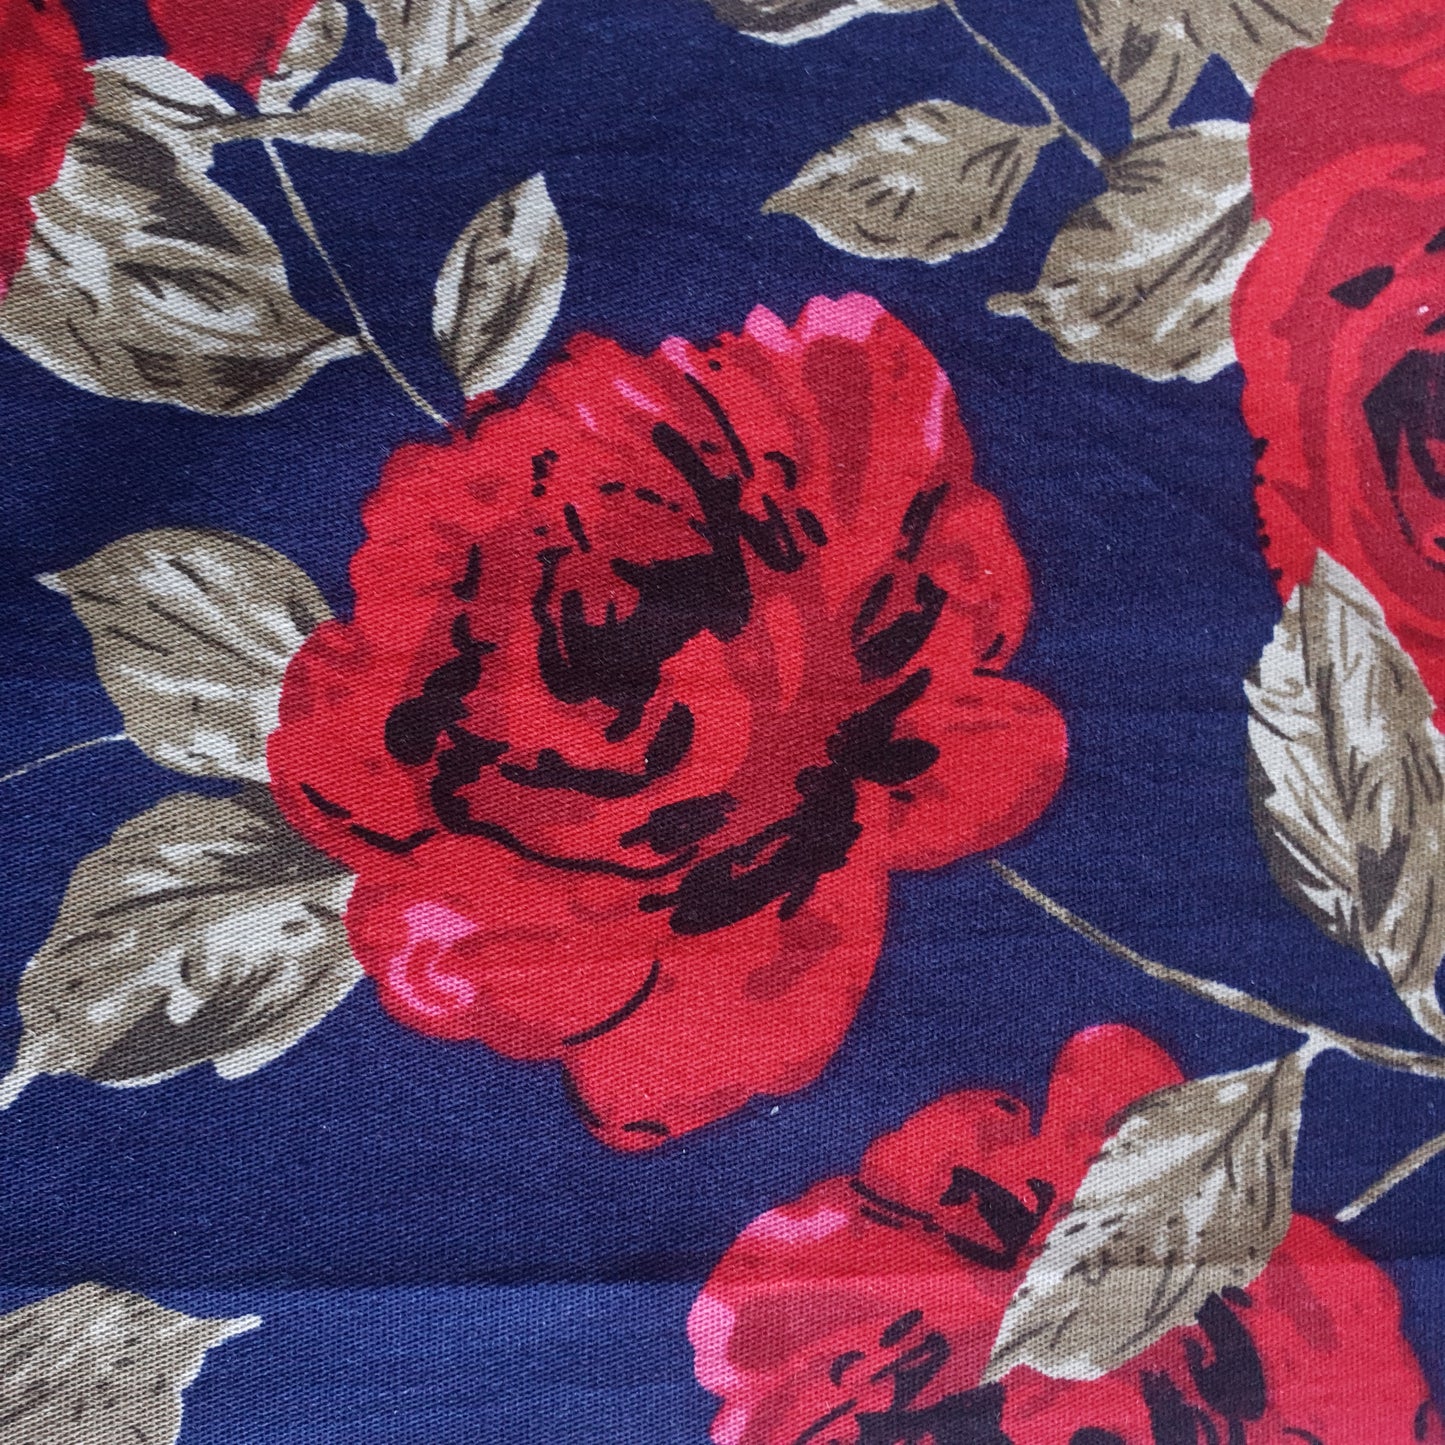 Woven Cotton Spandex Fabric - Floral - You’ve Got Me In Stitches